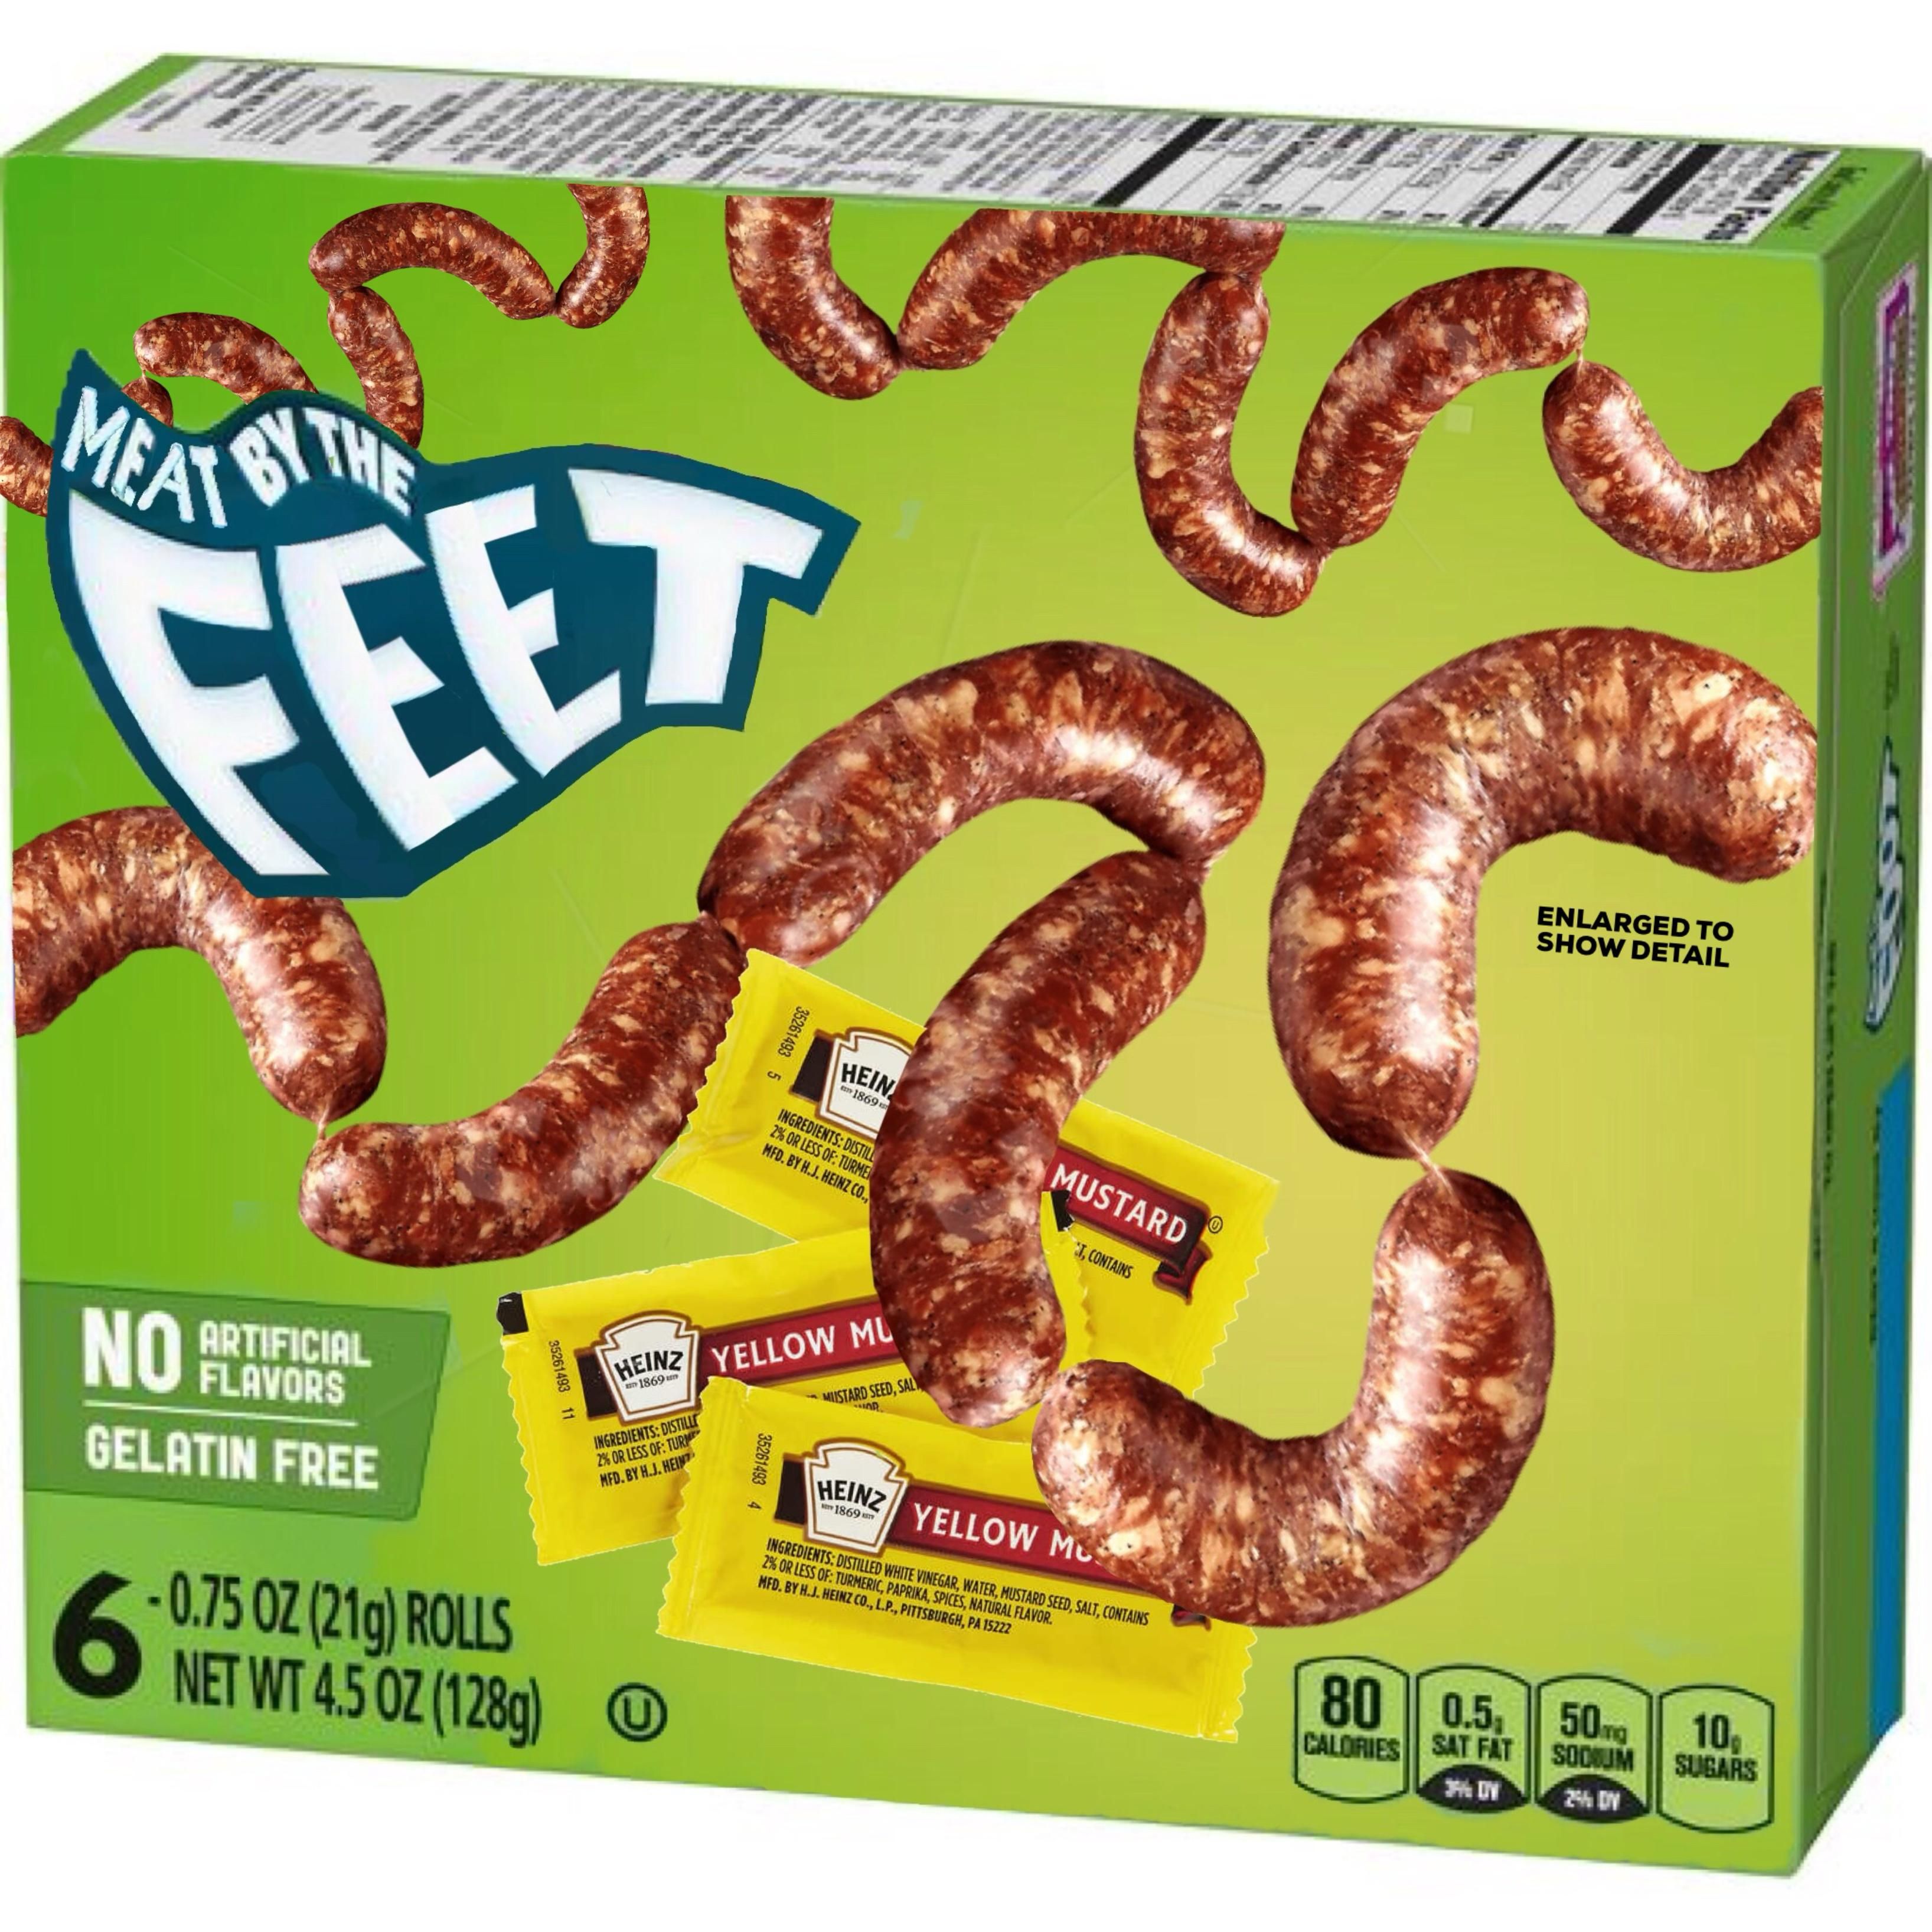 I enjoy creating fake products with photoshop. Here is Meat By The Feet.